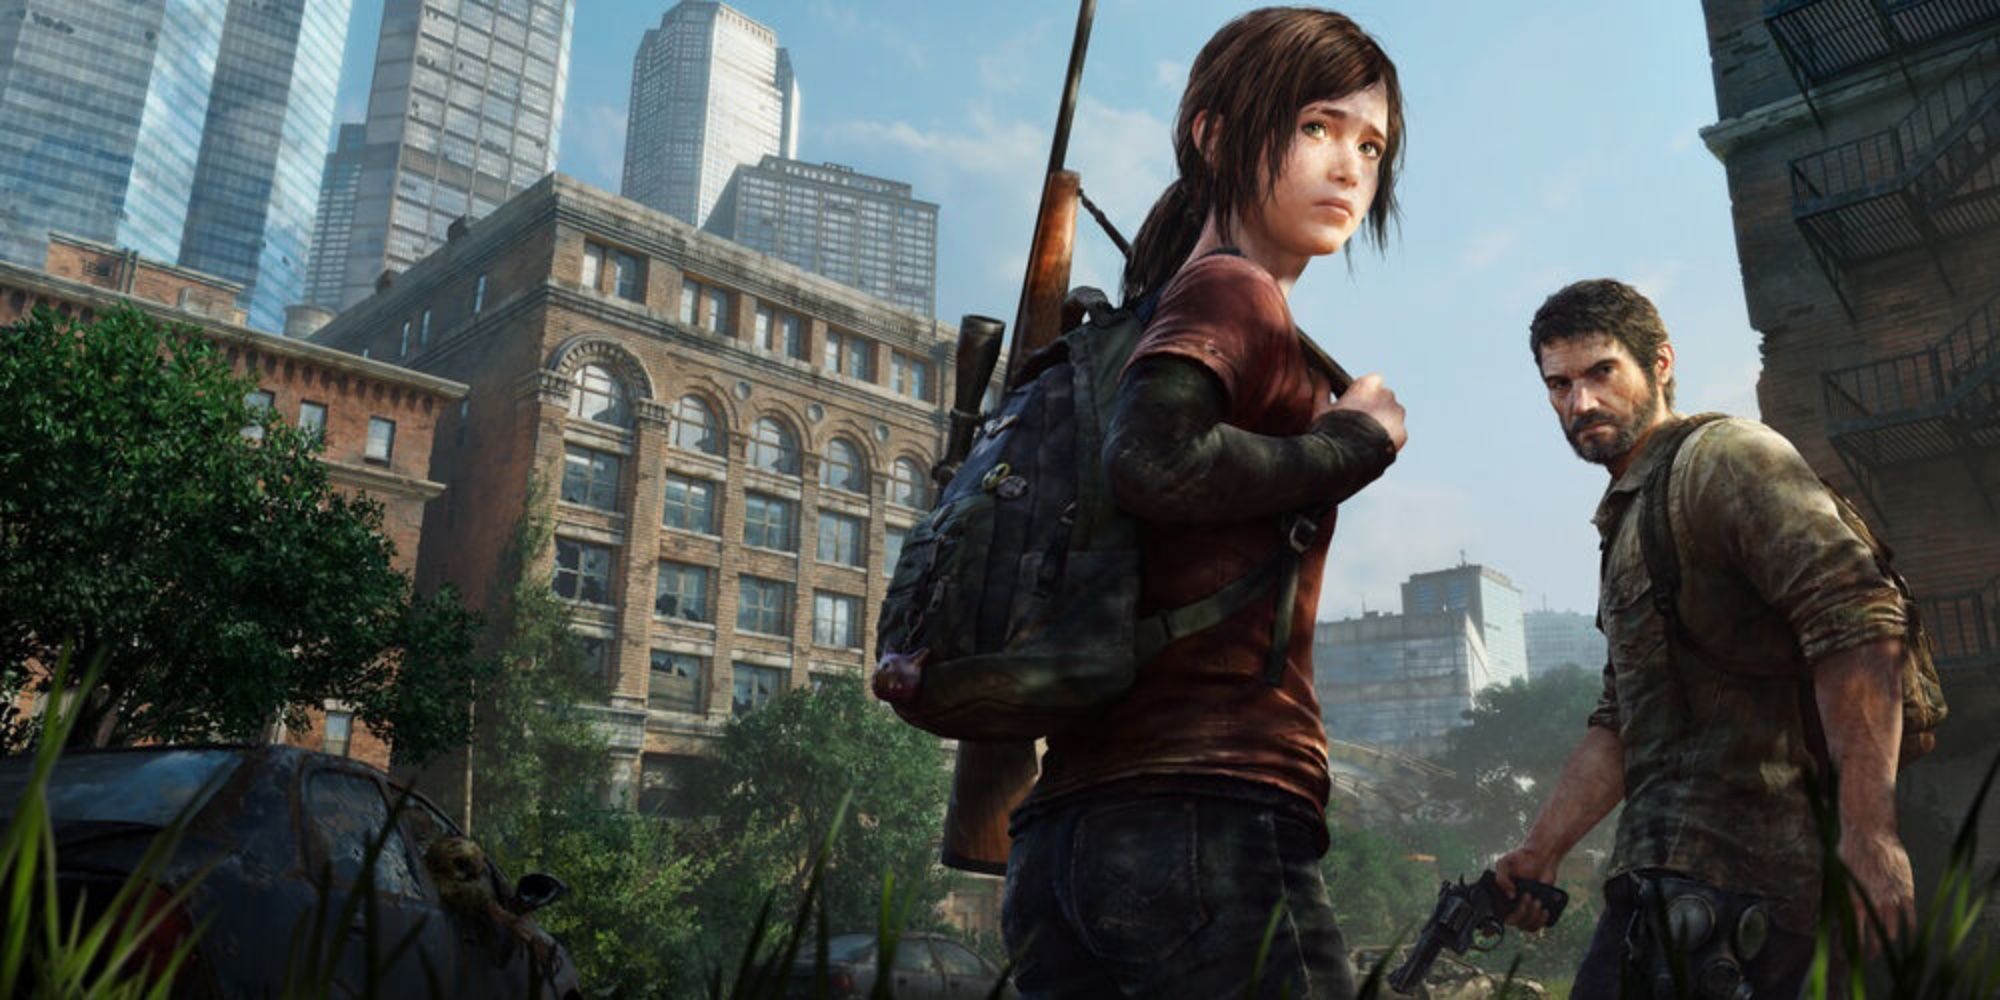 Best Years in Gaming - 2013 - The Last of Us - Joel and Ellie fight to survive